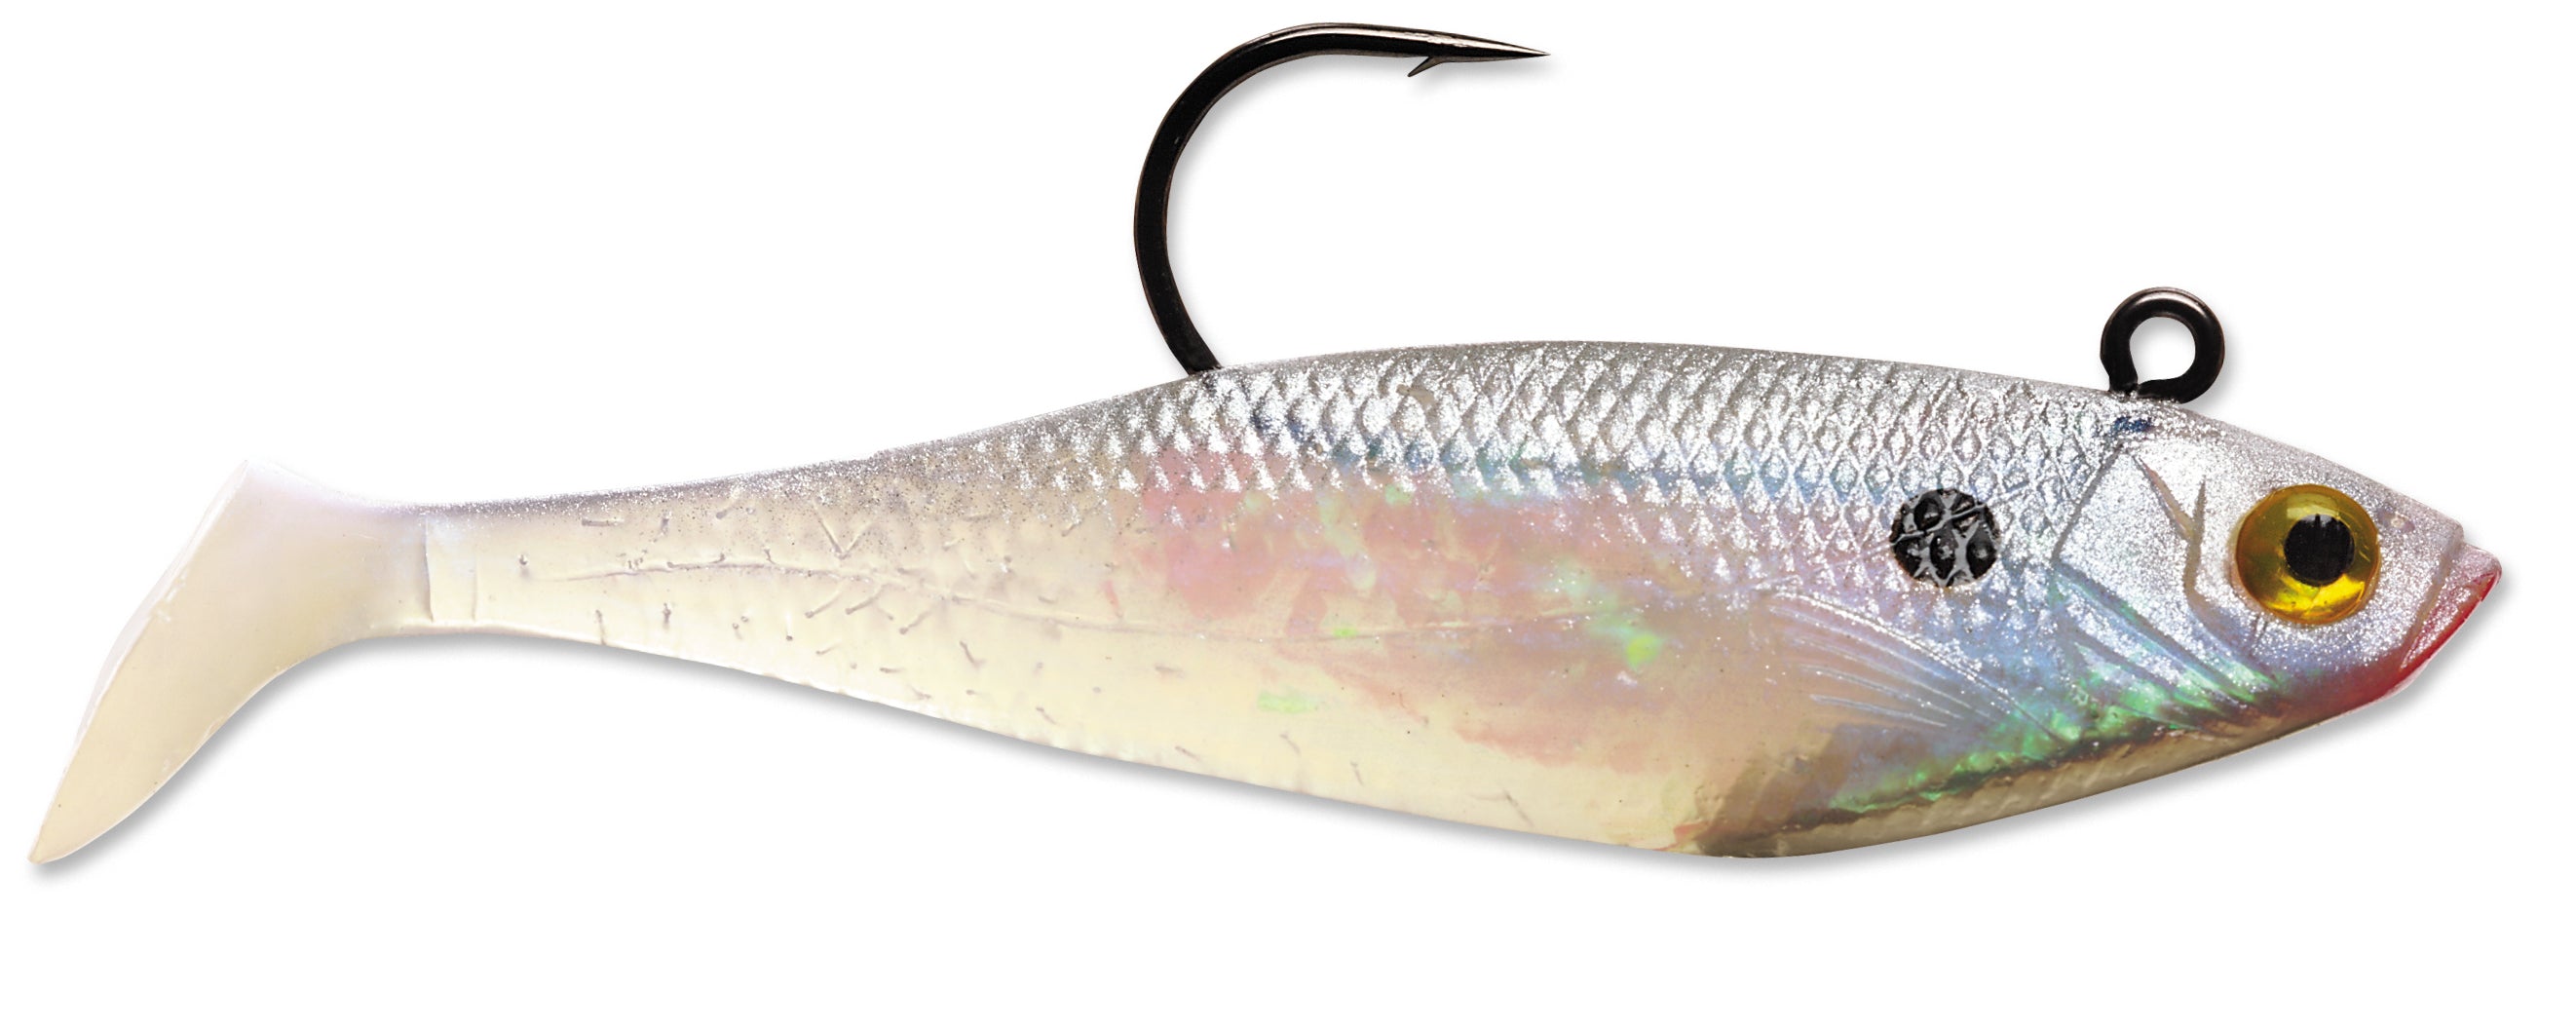 Storm WildEye Swim Shad Shiner Chartreuse Silver; 5 in.